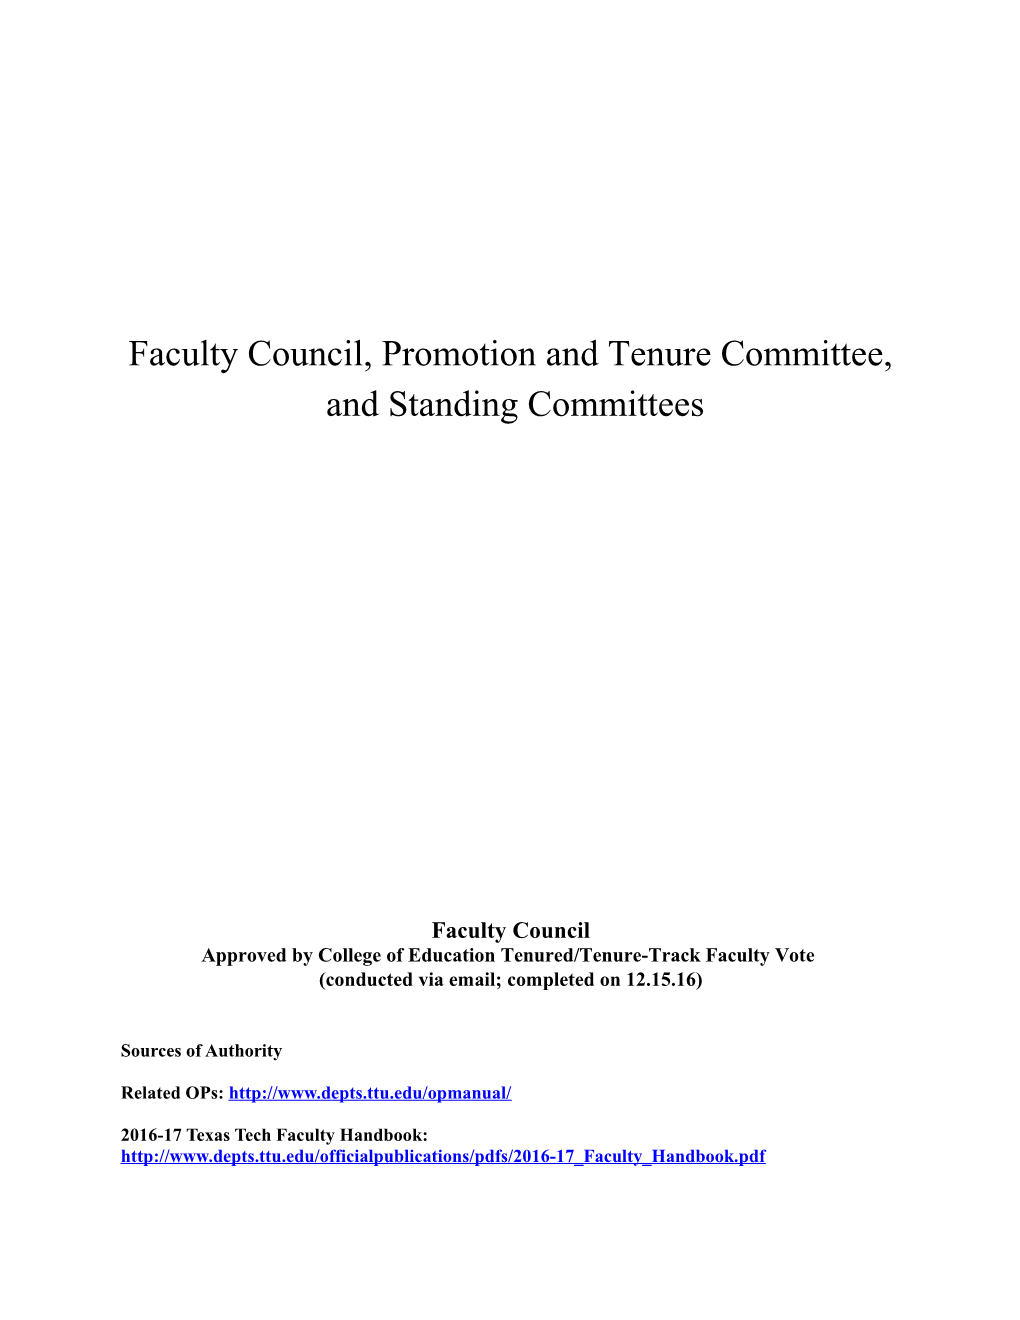 Faculty Council, Promotion and Tenure Committee